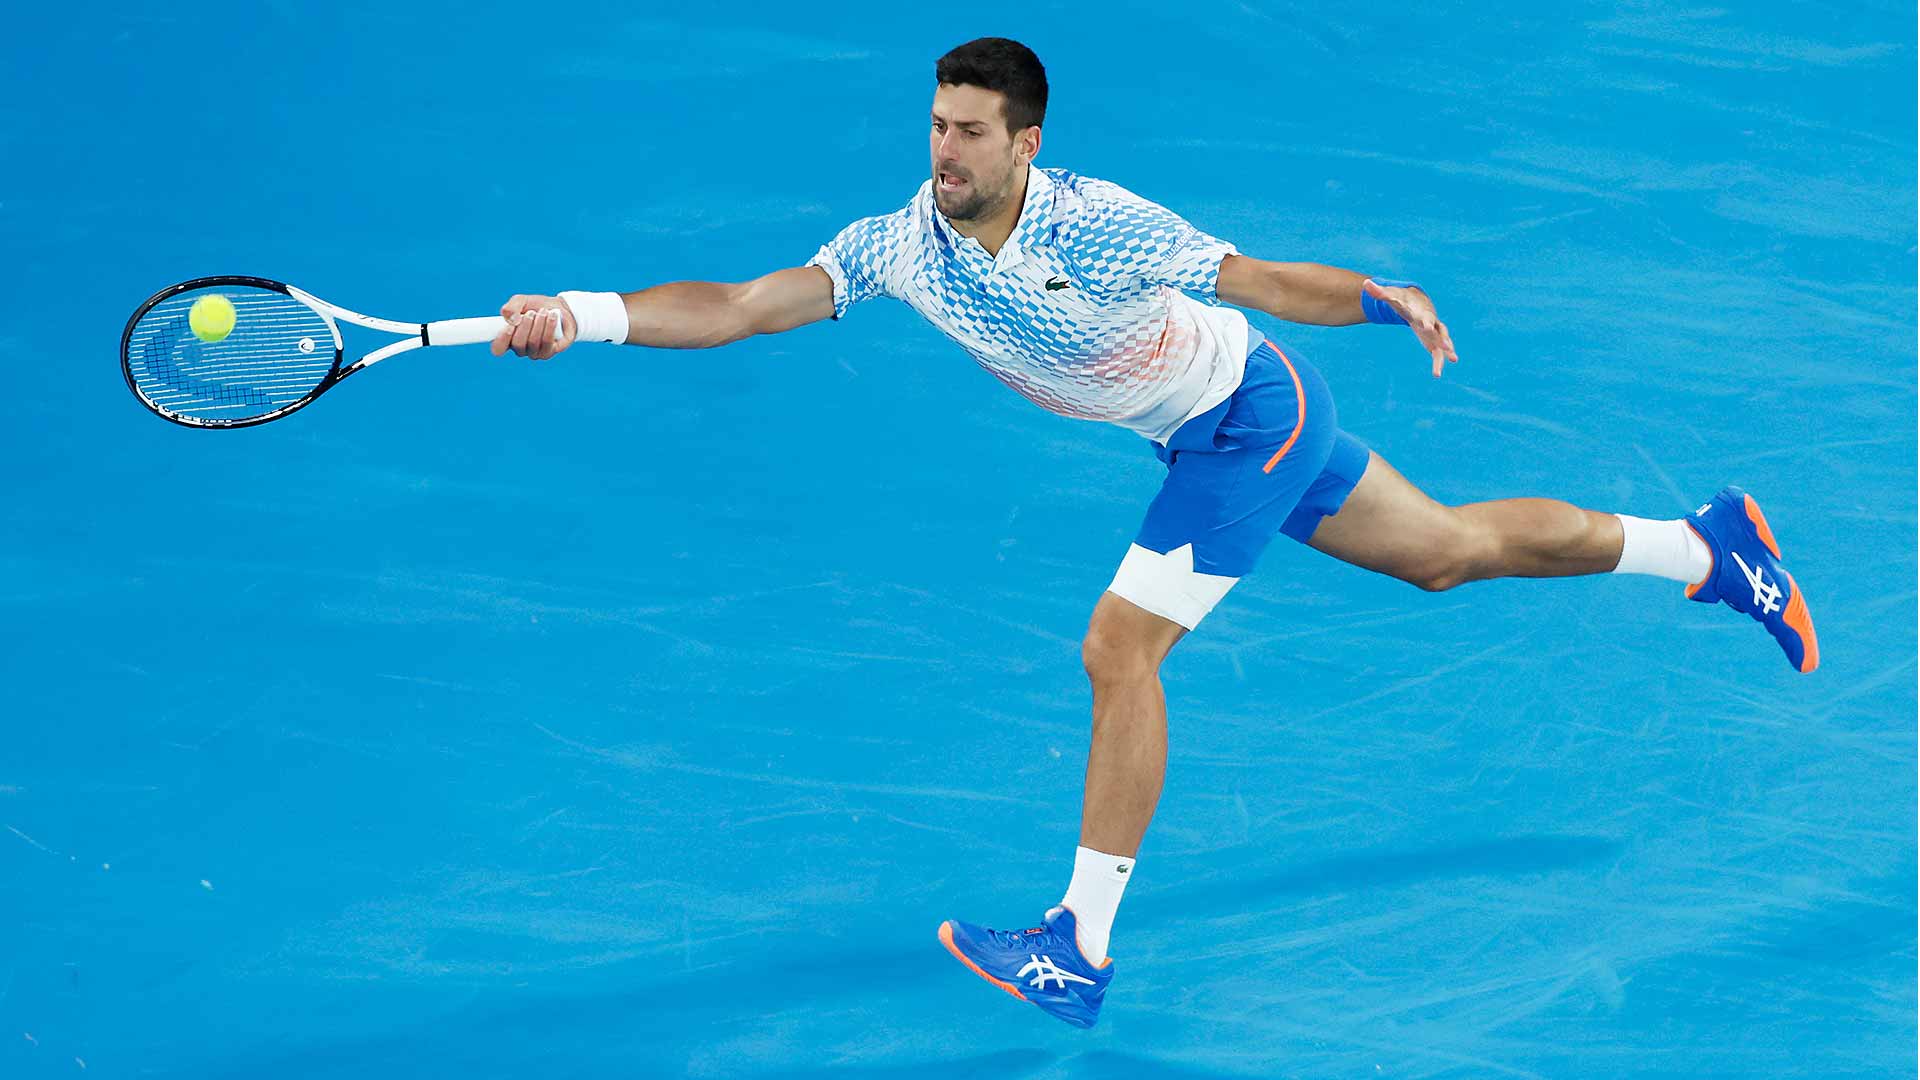 Novak Djokovic reaches the third round in Melbourne to continue his pursuit of a 10th Australian Open title.